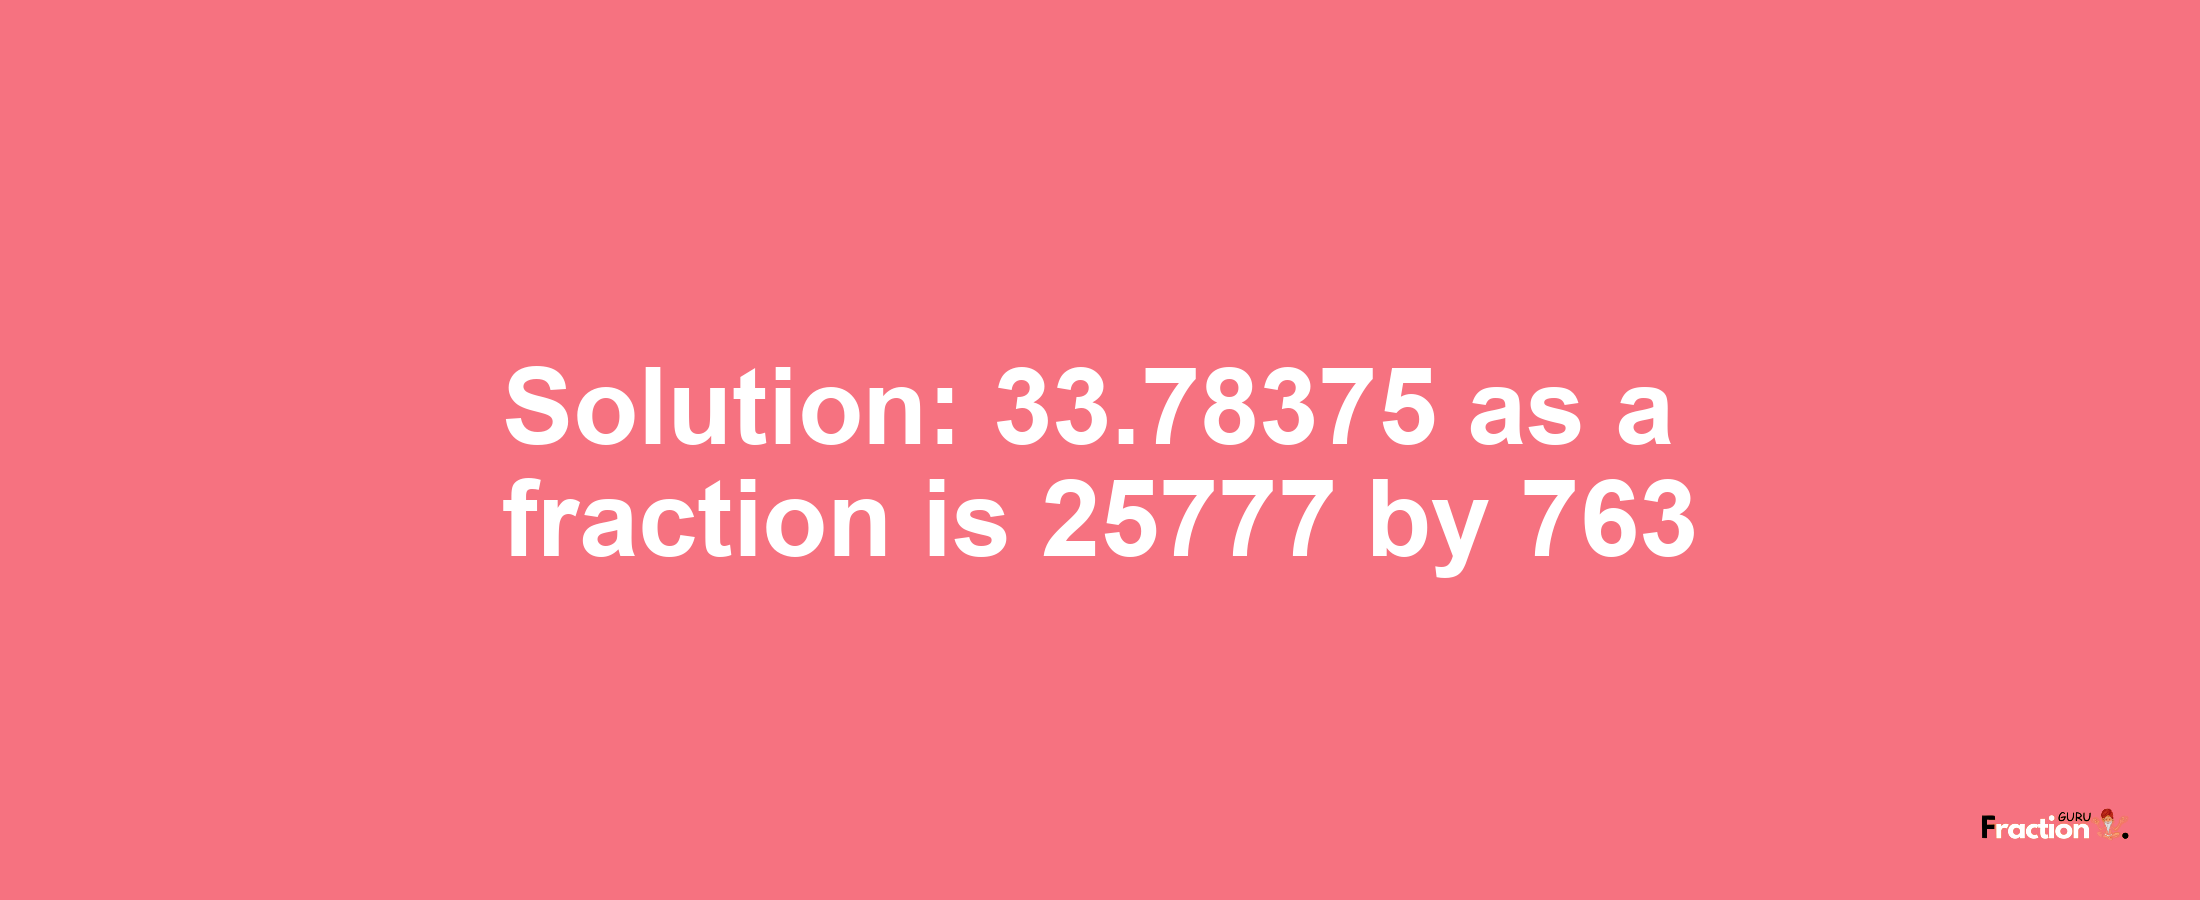 Solution:33.78375 as a fraction is 25777/763